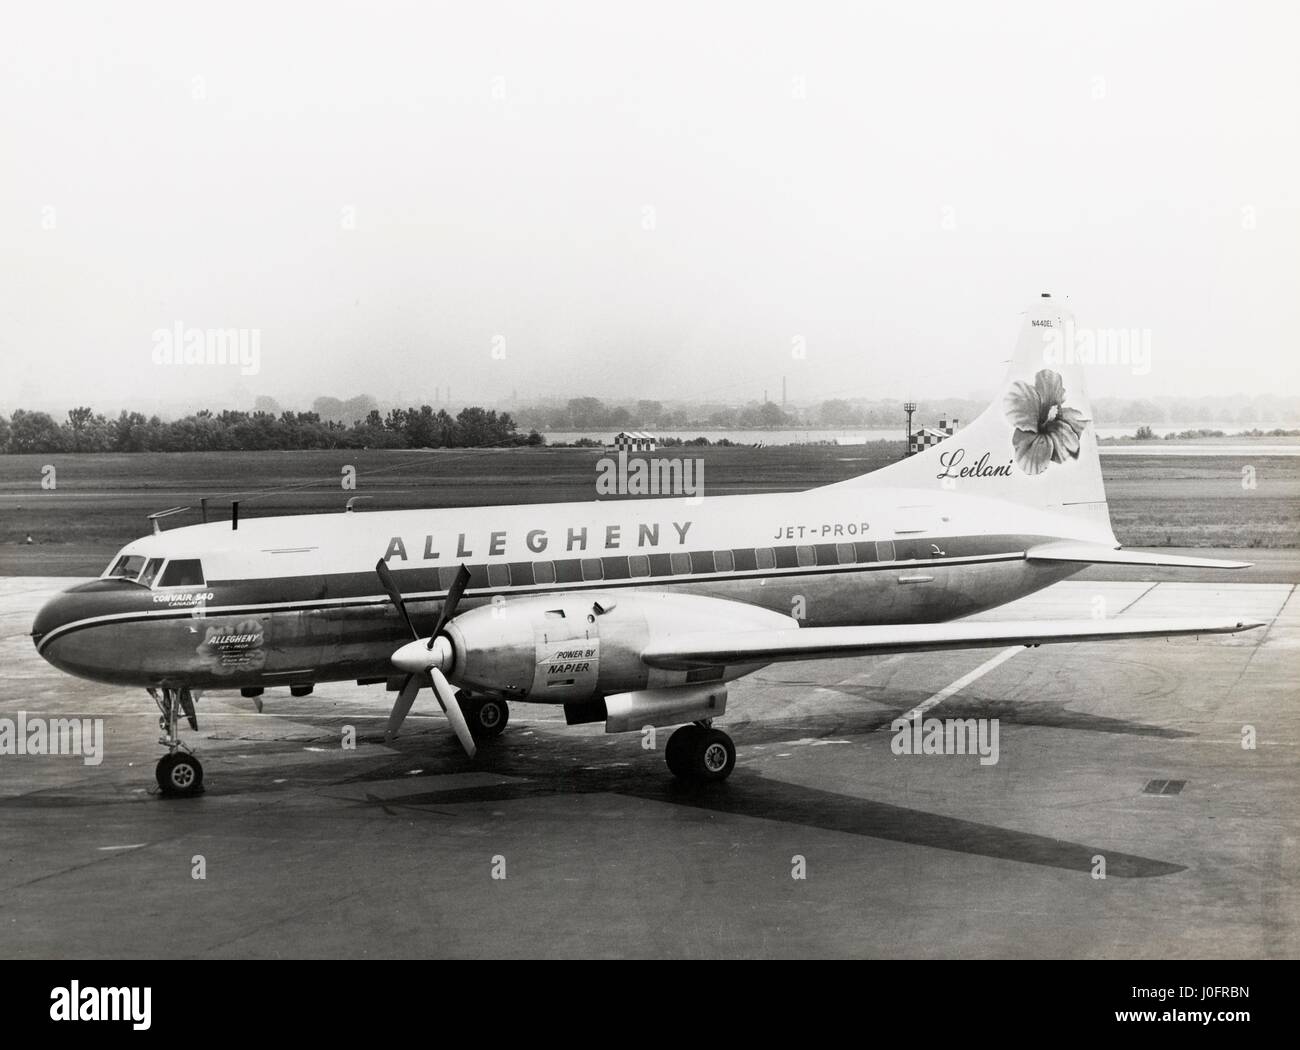 Allegheny jet prop, the Convair 540 leased to Allegheny Airlines Stock Photo